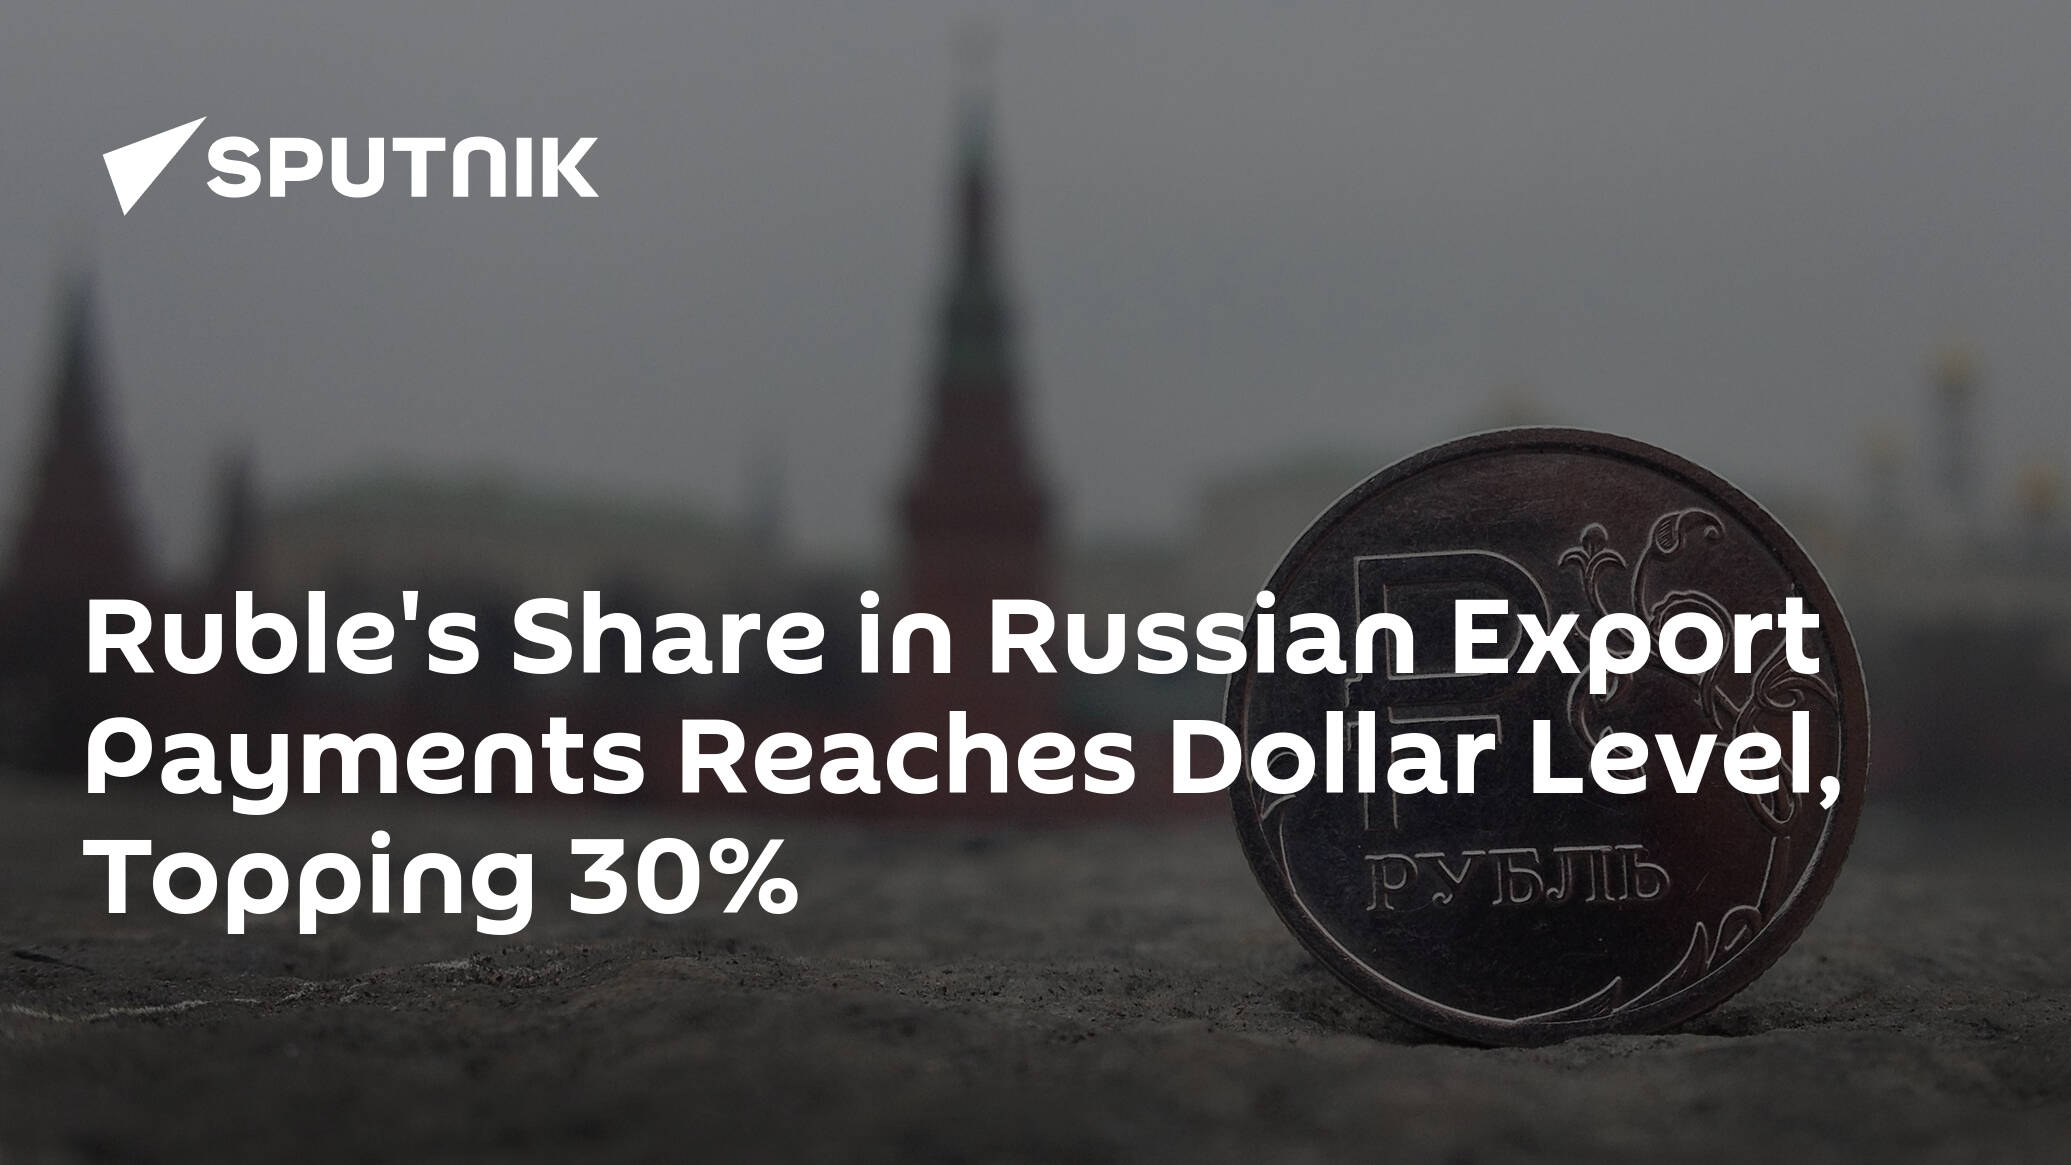 Ruble's Share in Russian Export Payments Reaches Dollar Level, Topping 30%